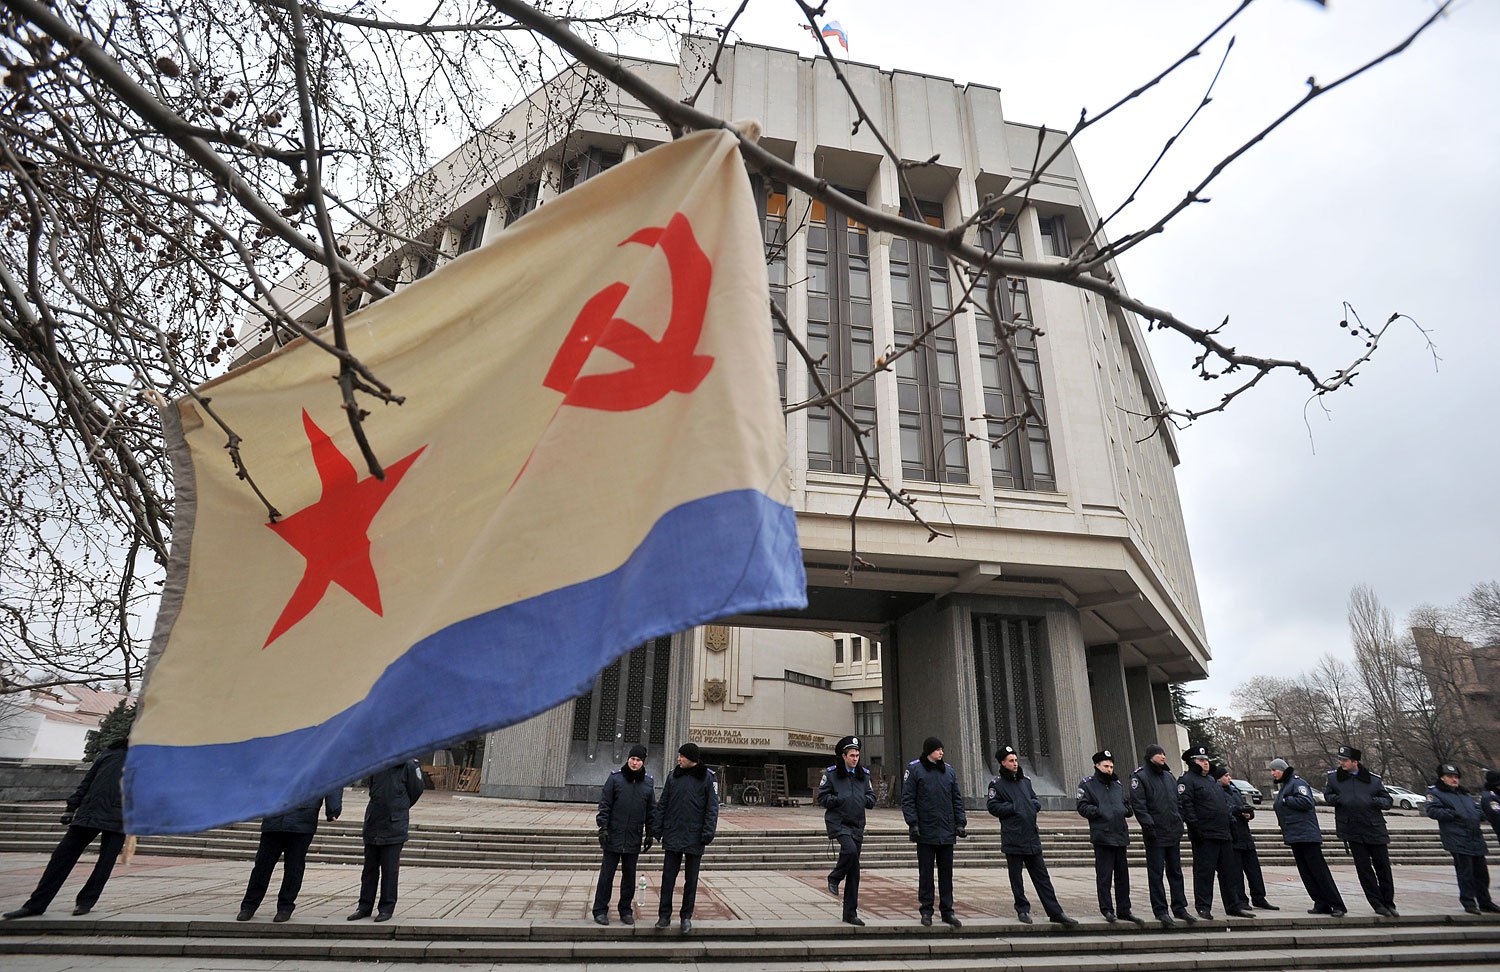 A flag of the Russian Navy hangs from a tree as policemen stand guard in front of the local parliament building on Feb. 28, 2014 in Simferopol.